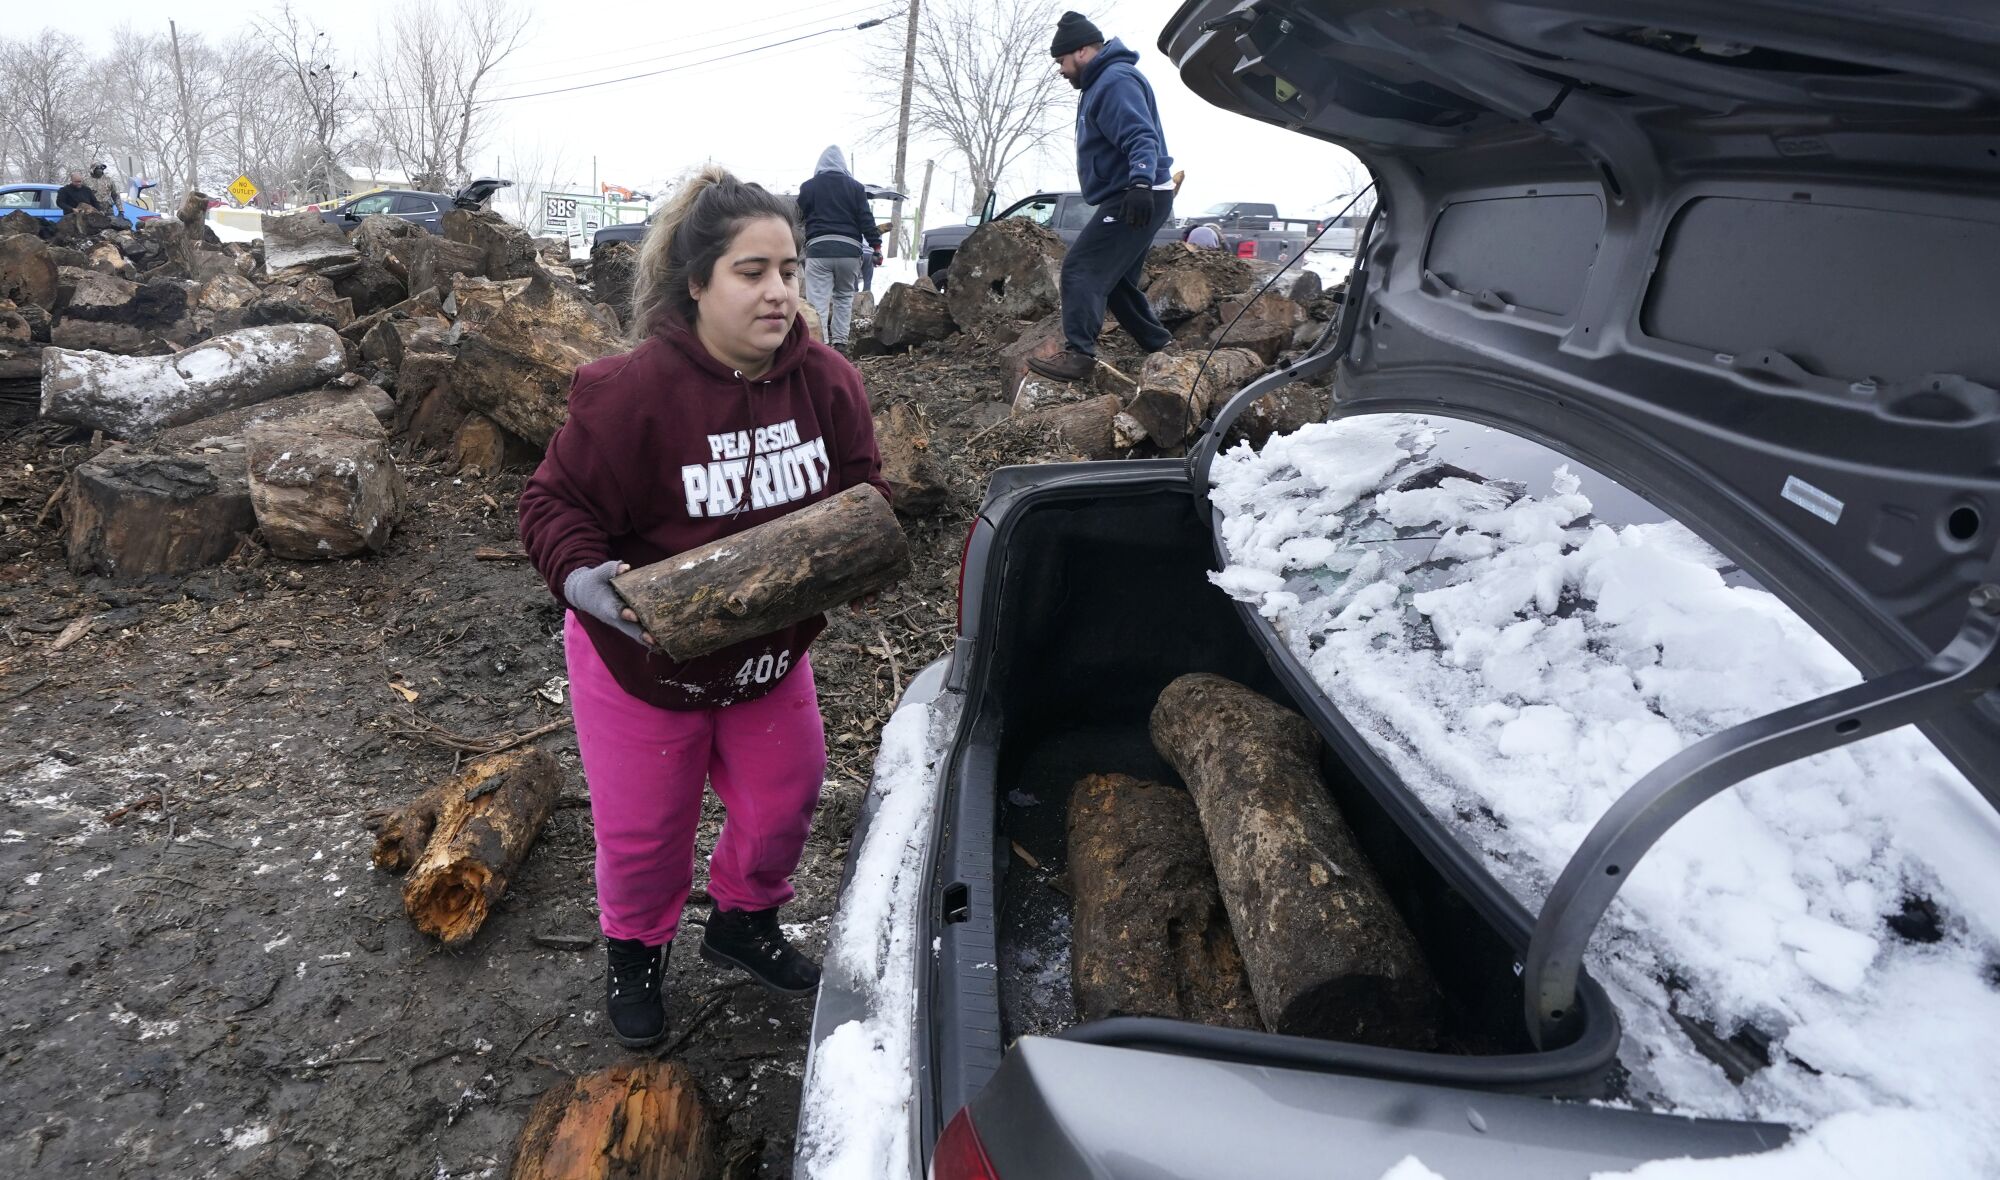 A woman loads firewood into a trunk.